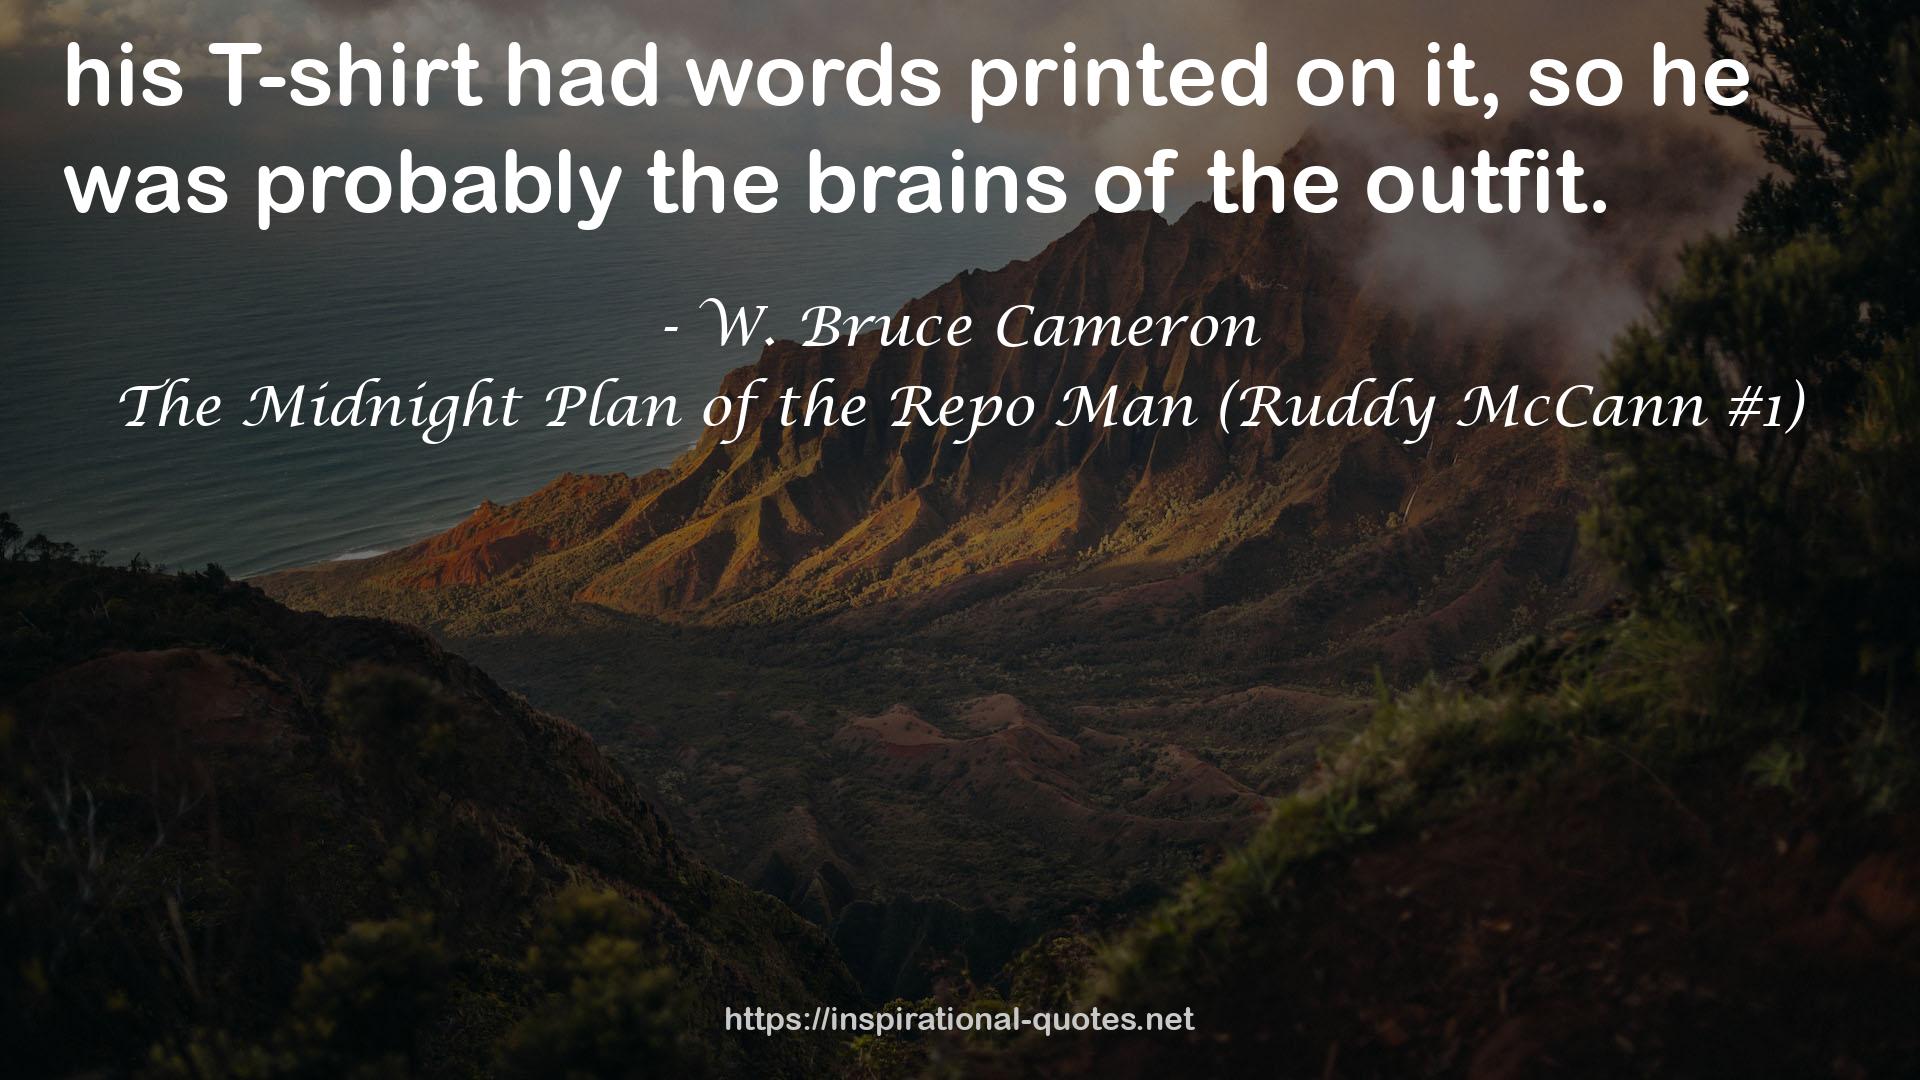 The Midnight Plan of the Repo Man (Ruddy McCann #1) QUOTES